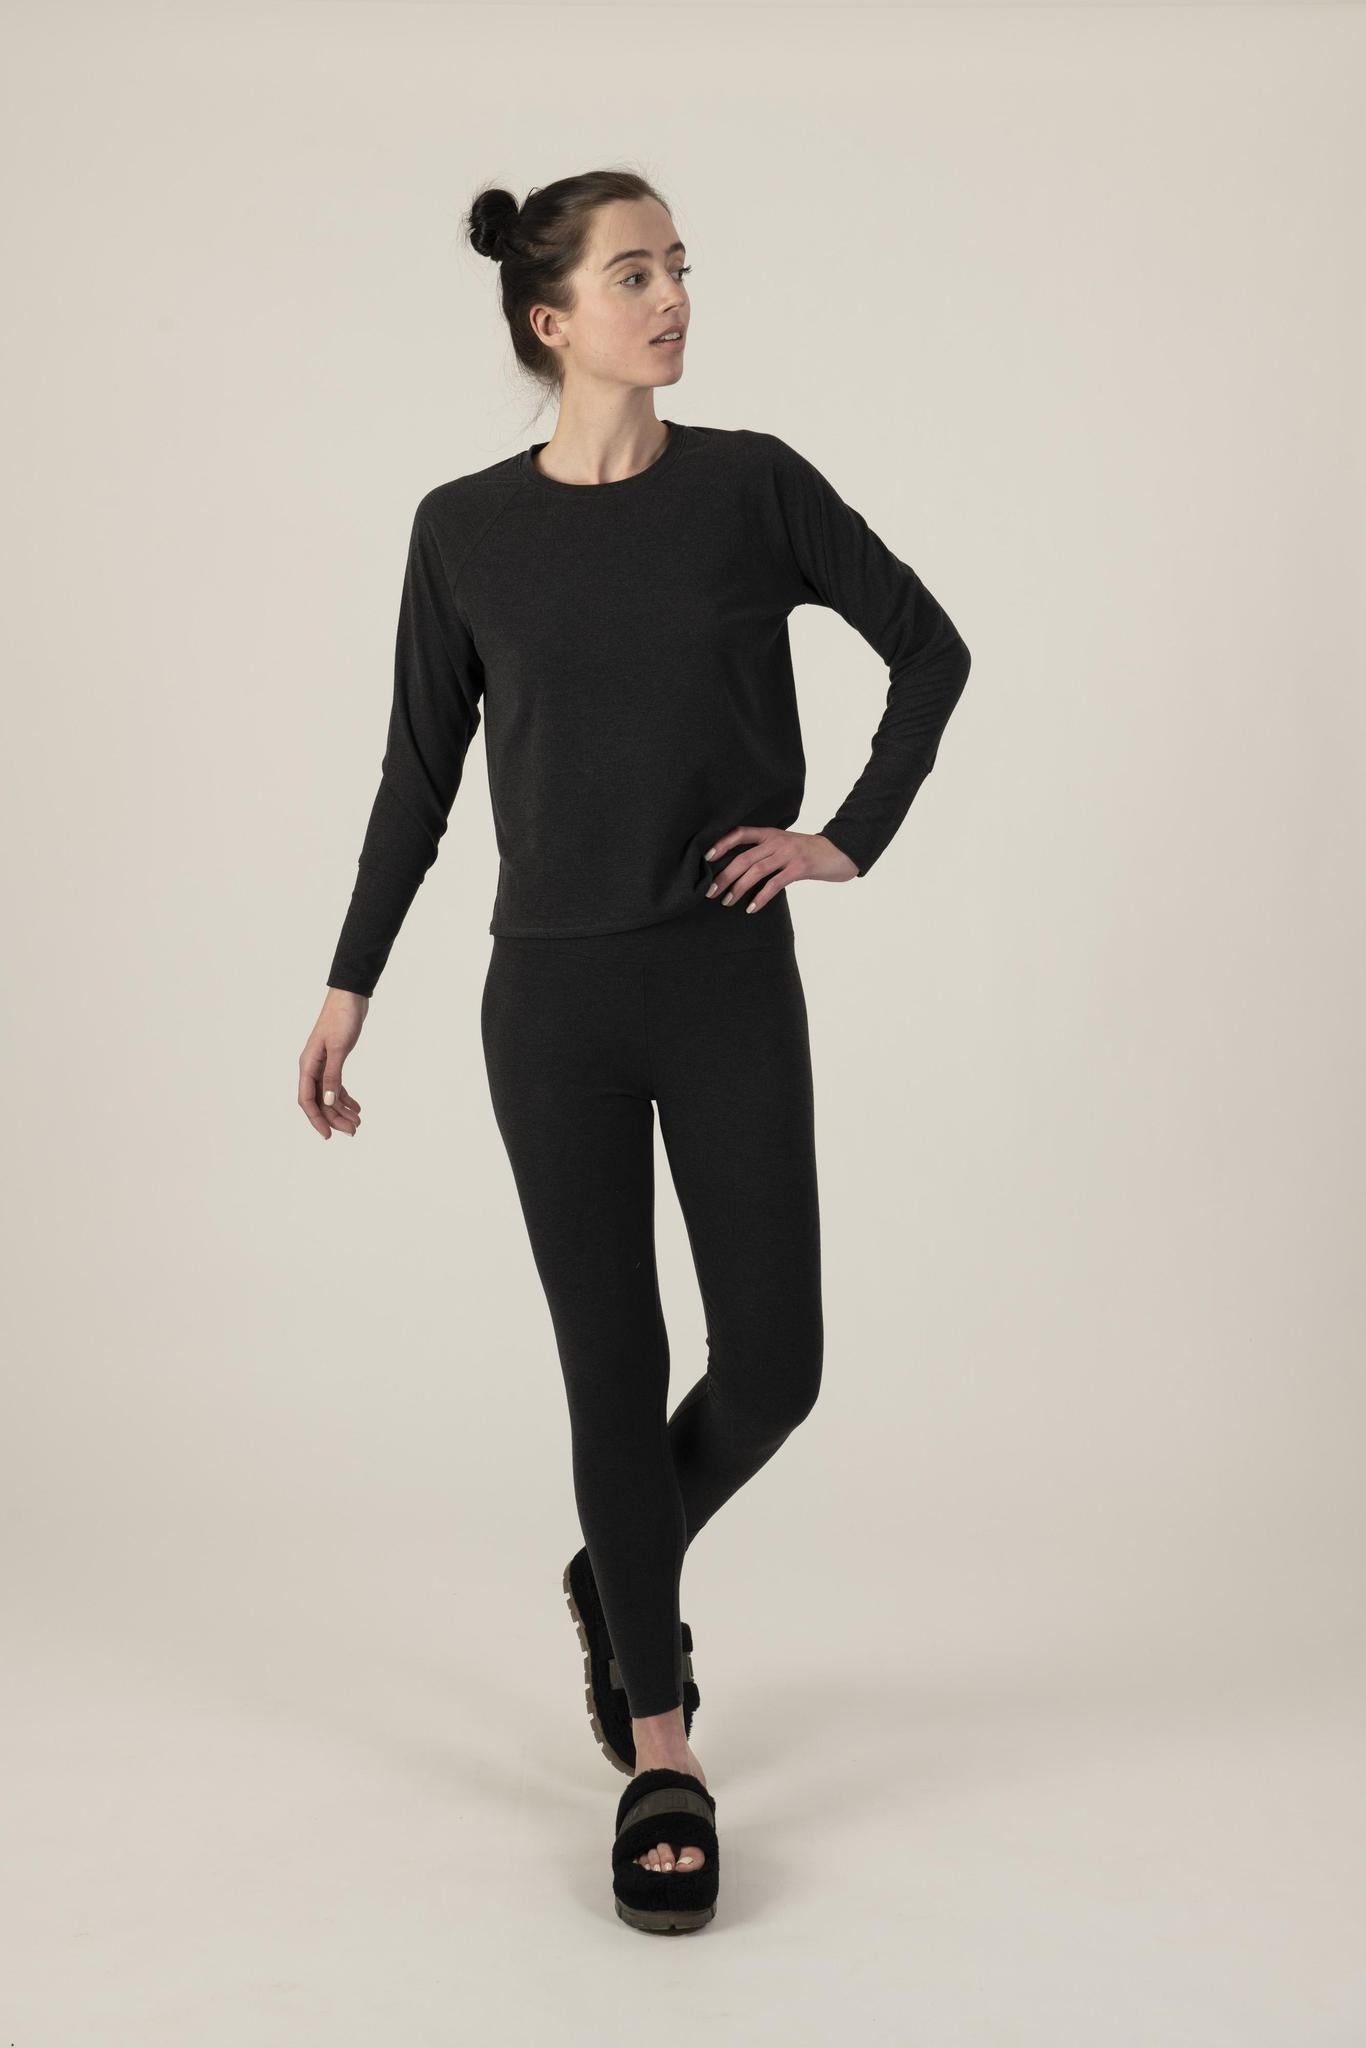 Comfy buttery soft track legging